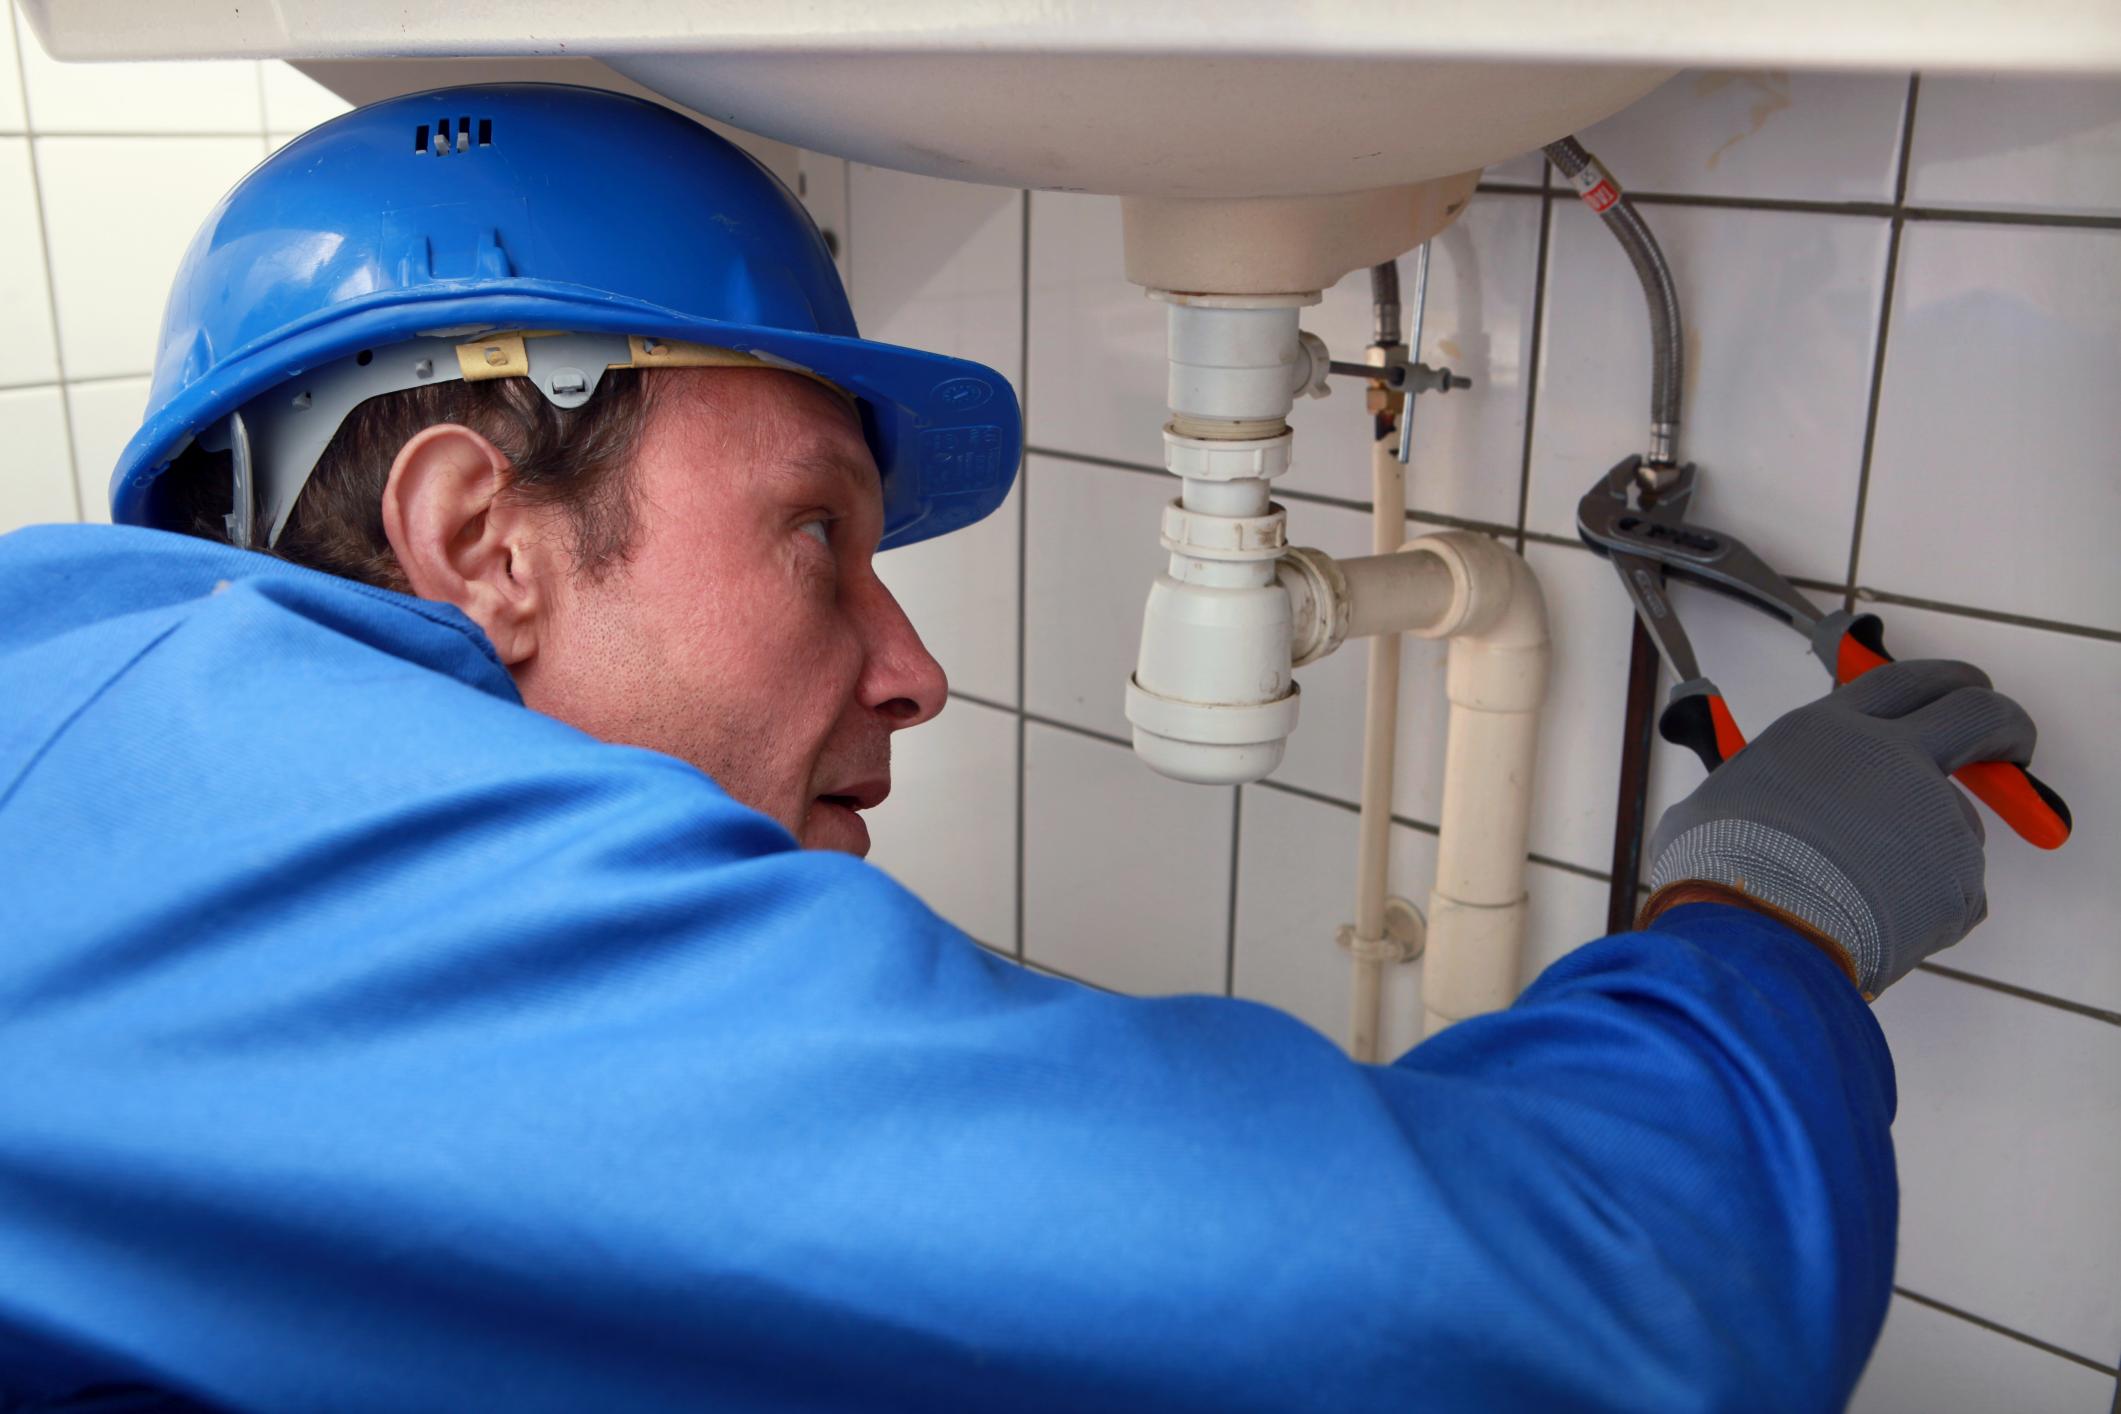 North Bay Plumbers - Plumbing Services